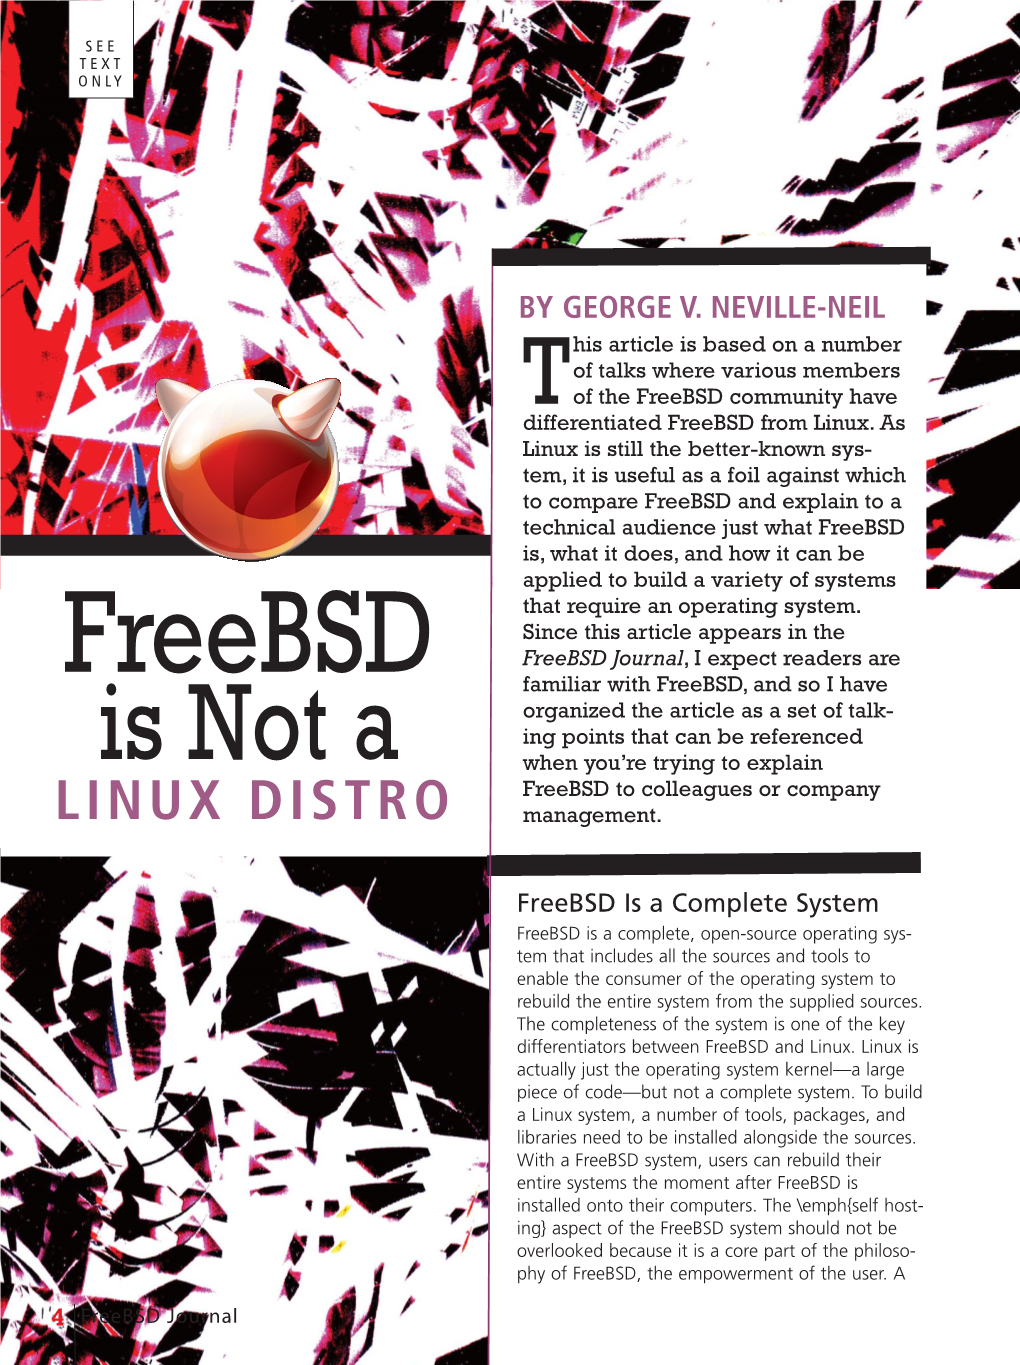 Freebsd Is Not a Linux Distro